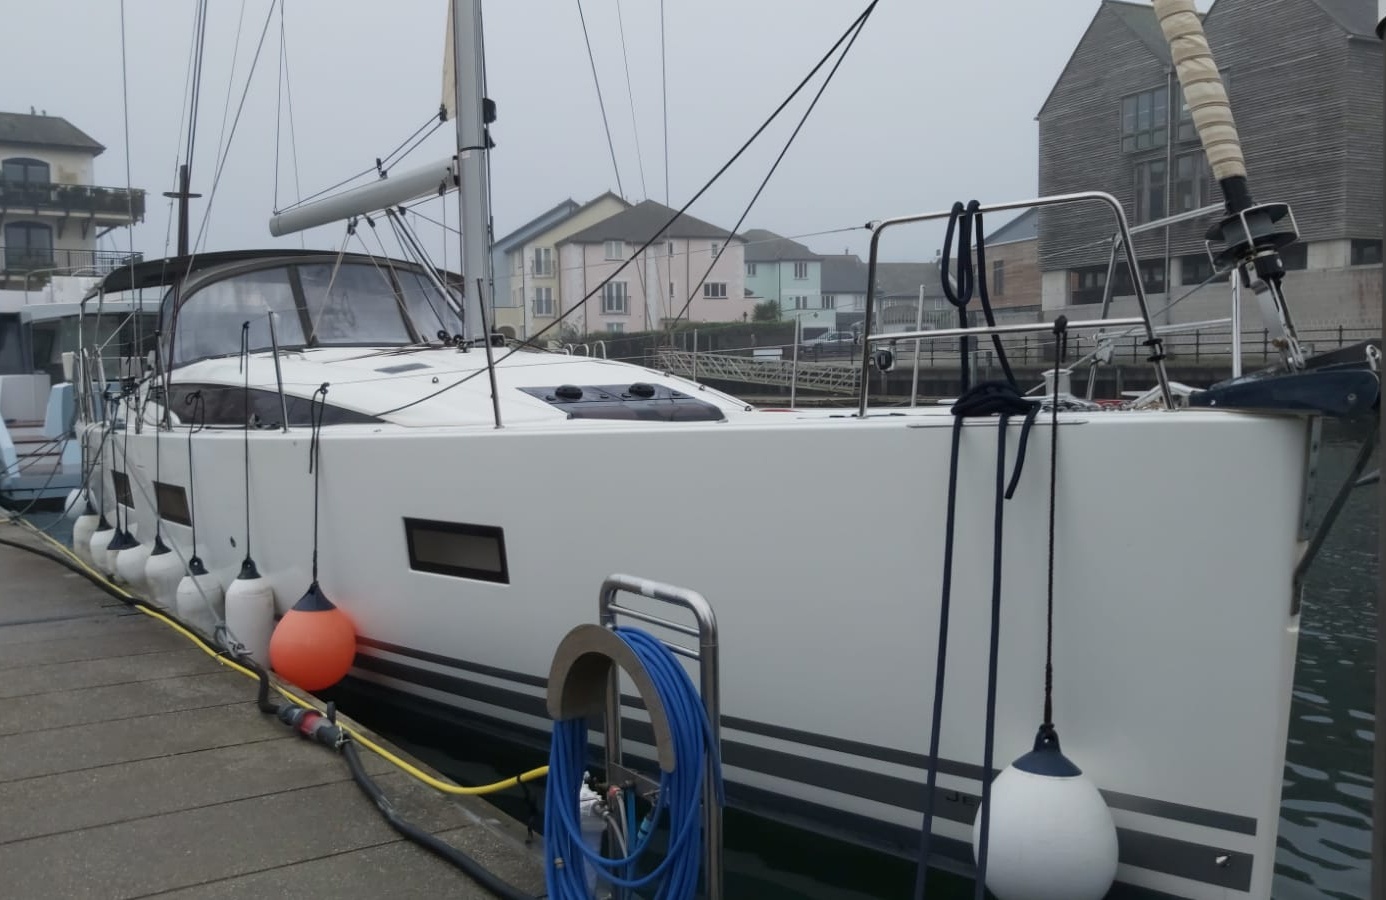 Jeanneau 54 DS yacht moored up after the delivery sail from Spain to the UK